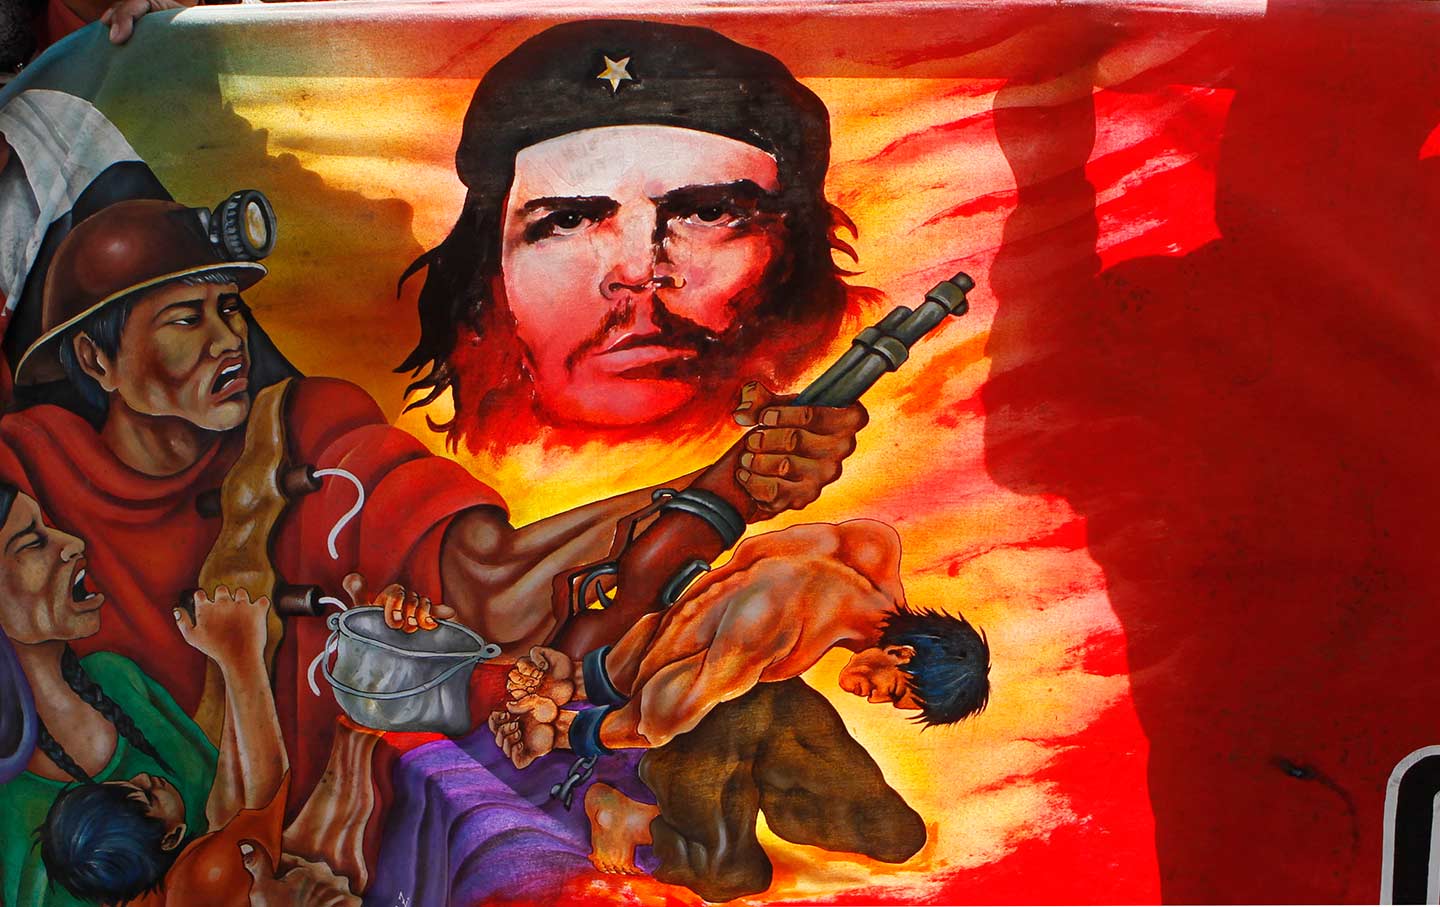 It's over': How I captured Che Guevara